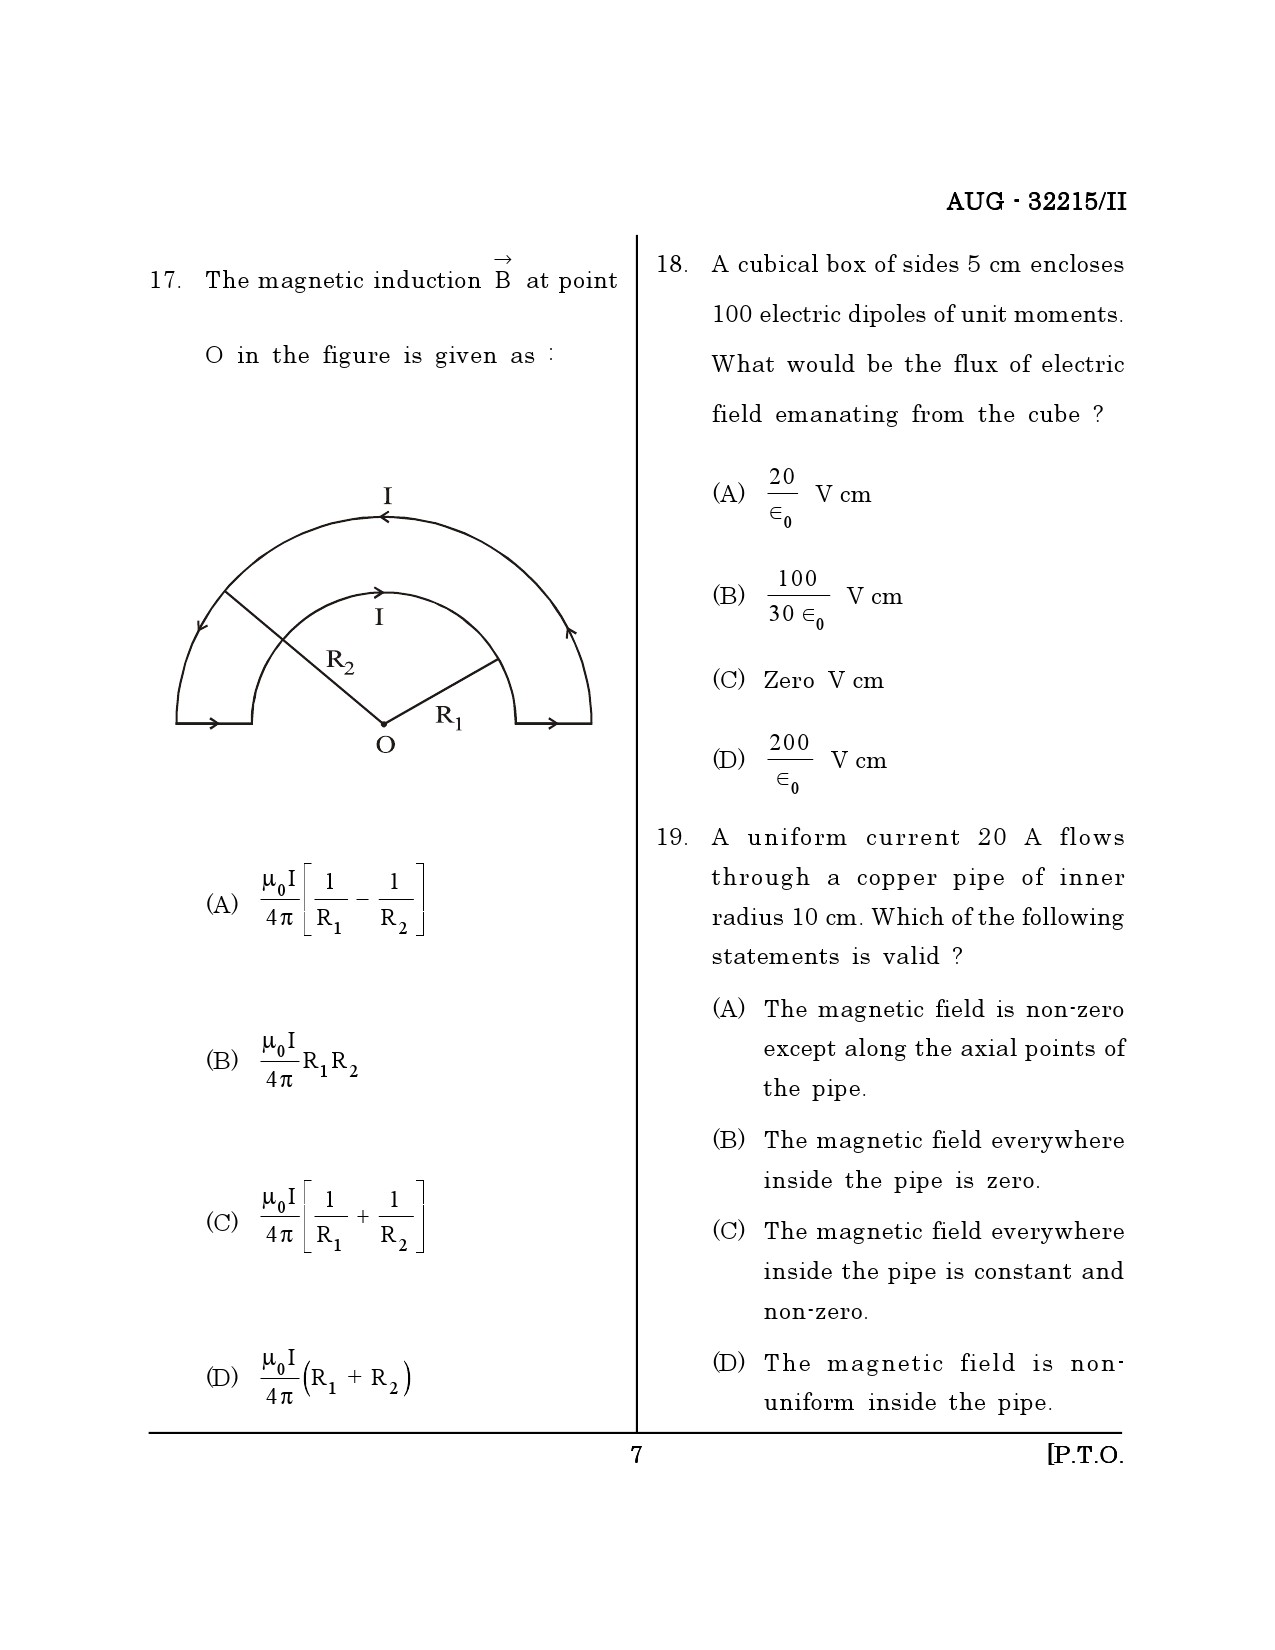 Maharashtra SET Physical Science Question Paper II August 2015 6